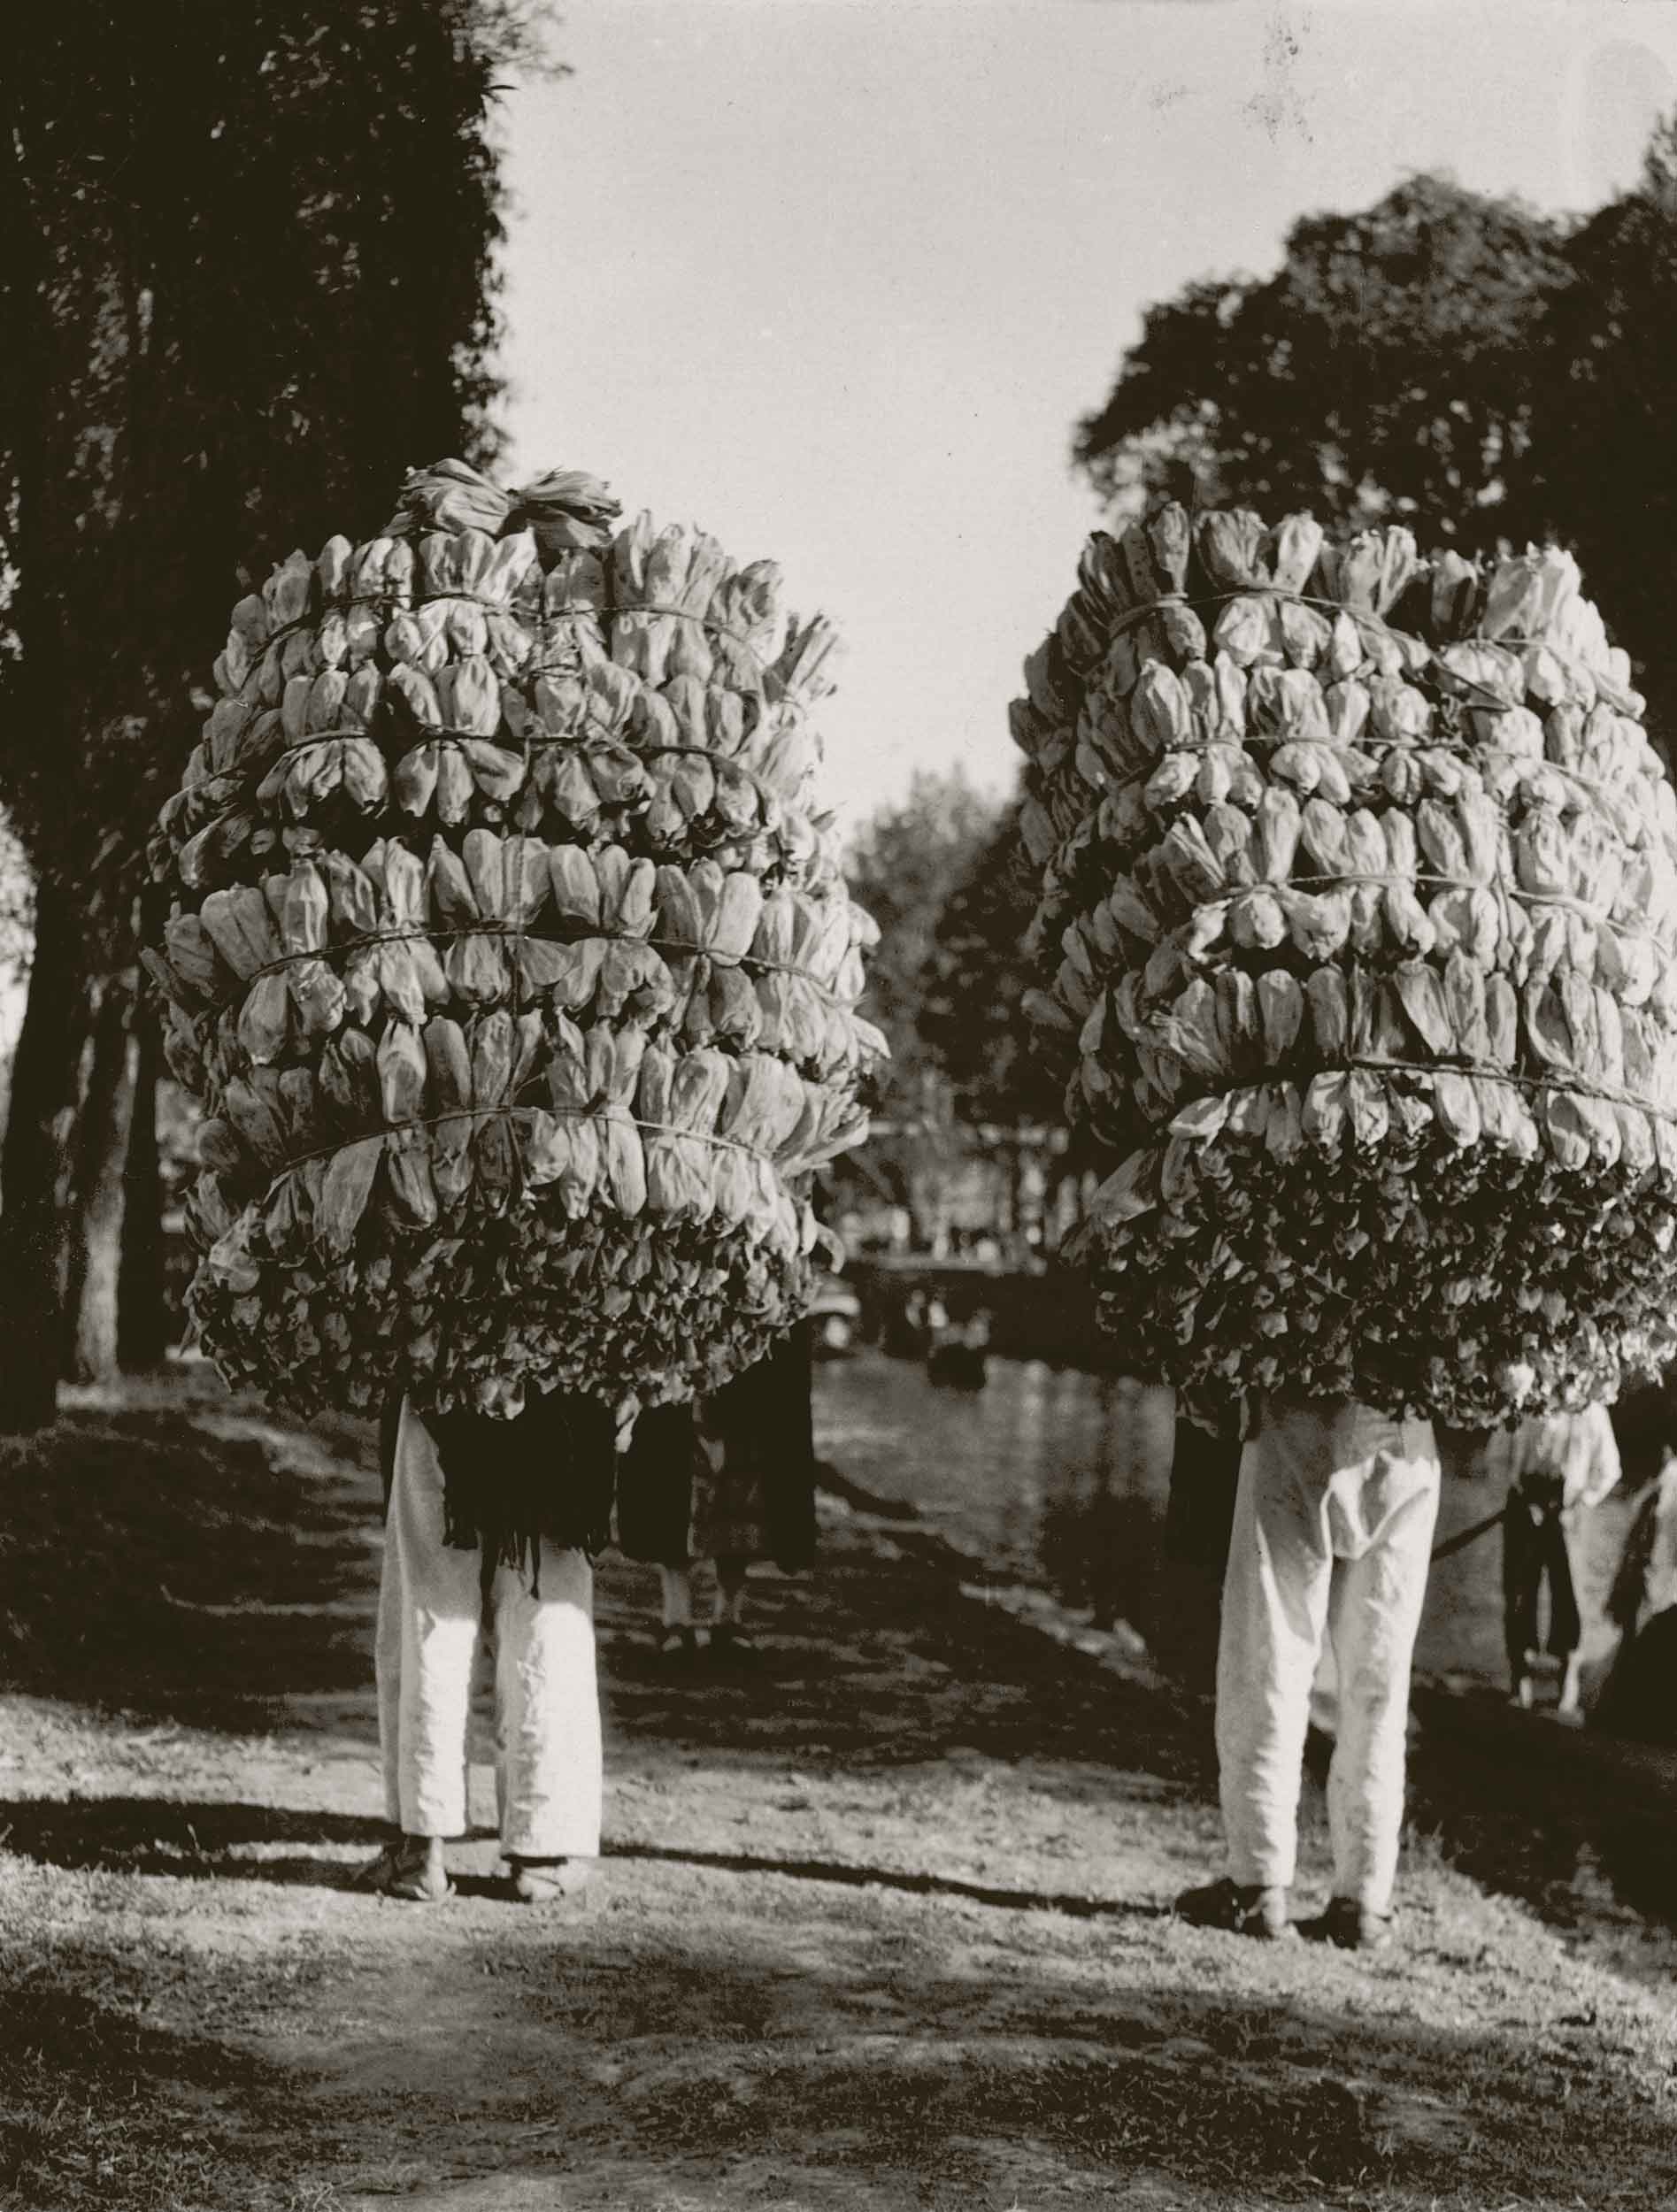 Untitled (Indians Carrying Loads of Corn Husks for the Making of “Tamales”),